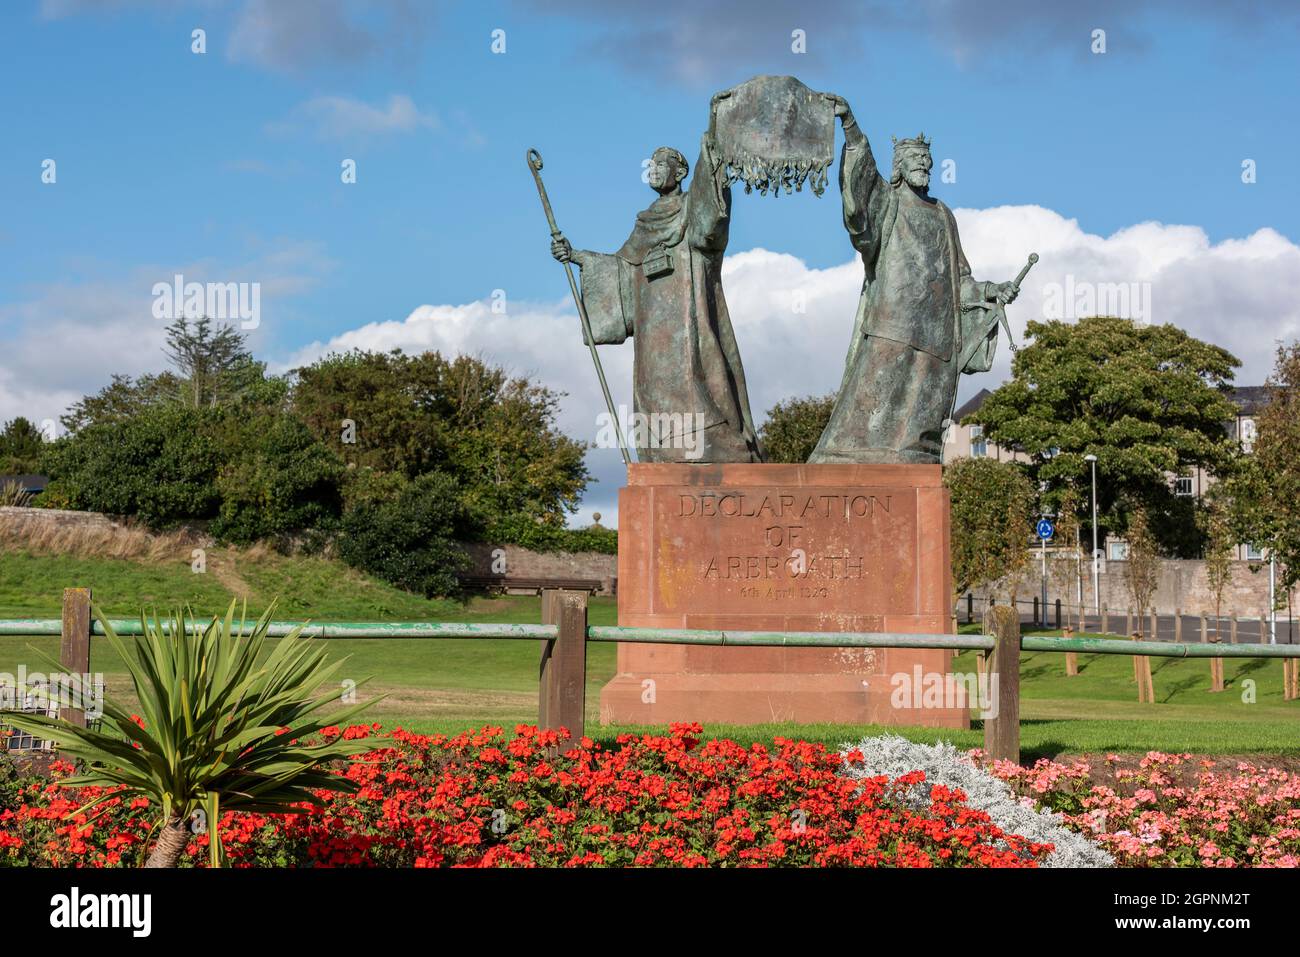 Colourful floral display in front of the Declaration of Arbroath monument, Arbroath,  Angus, Scotland. Stock Photo